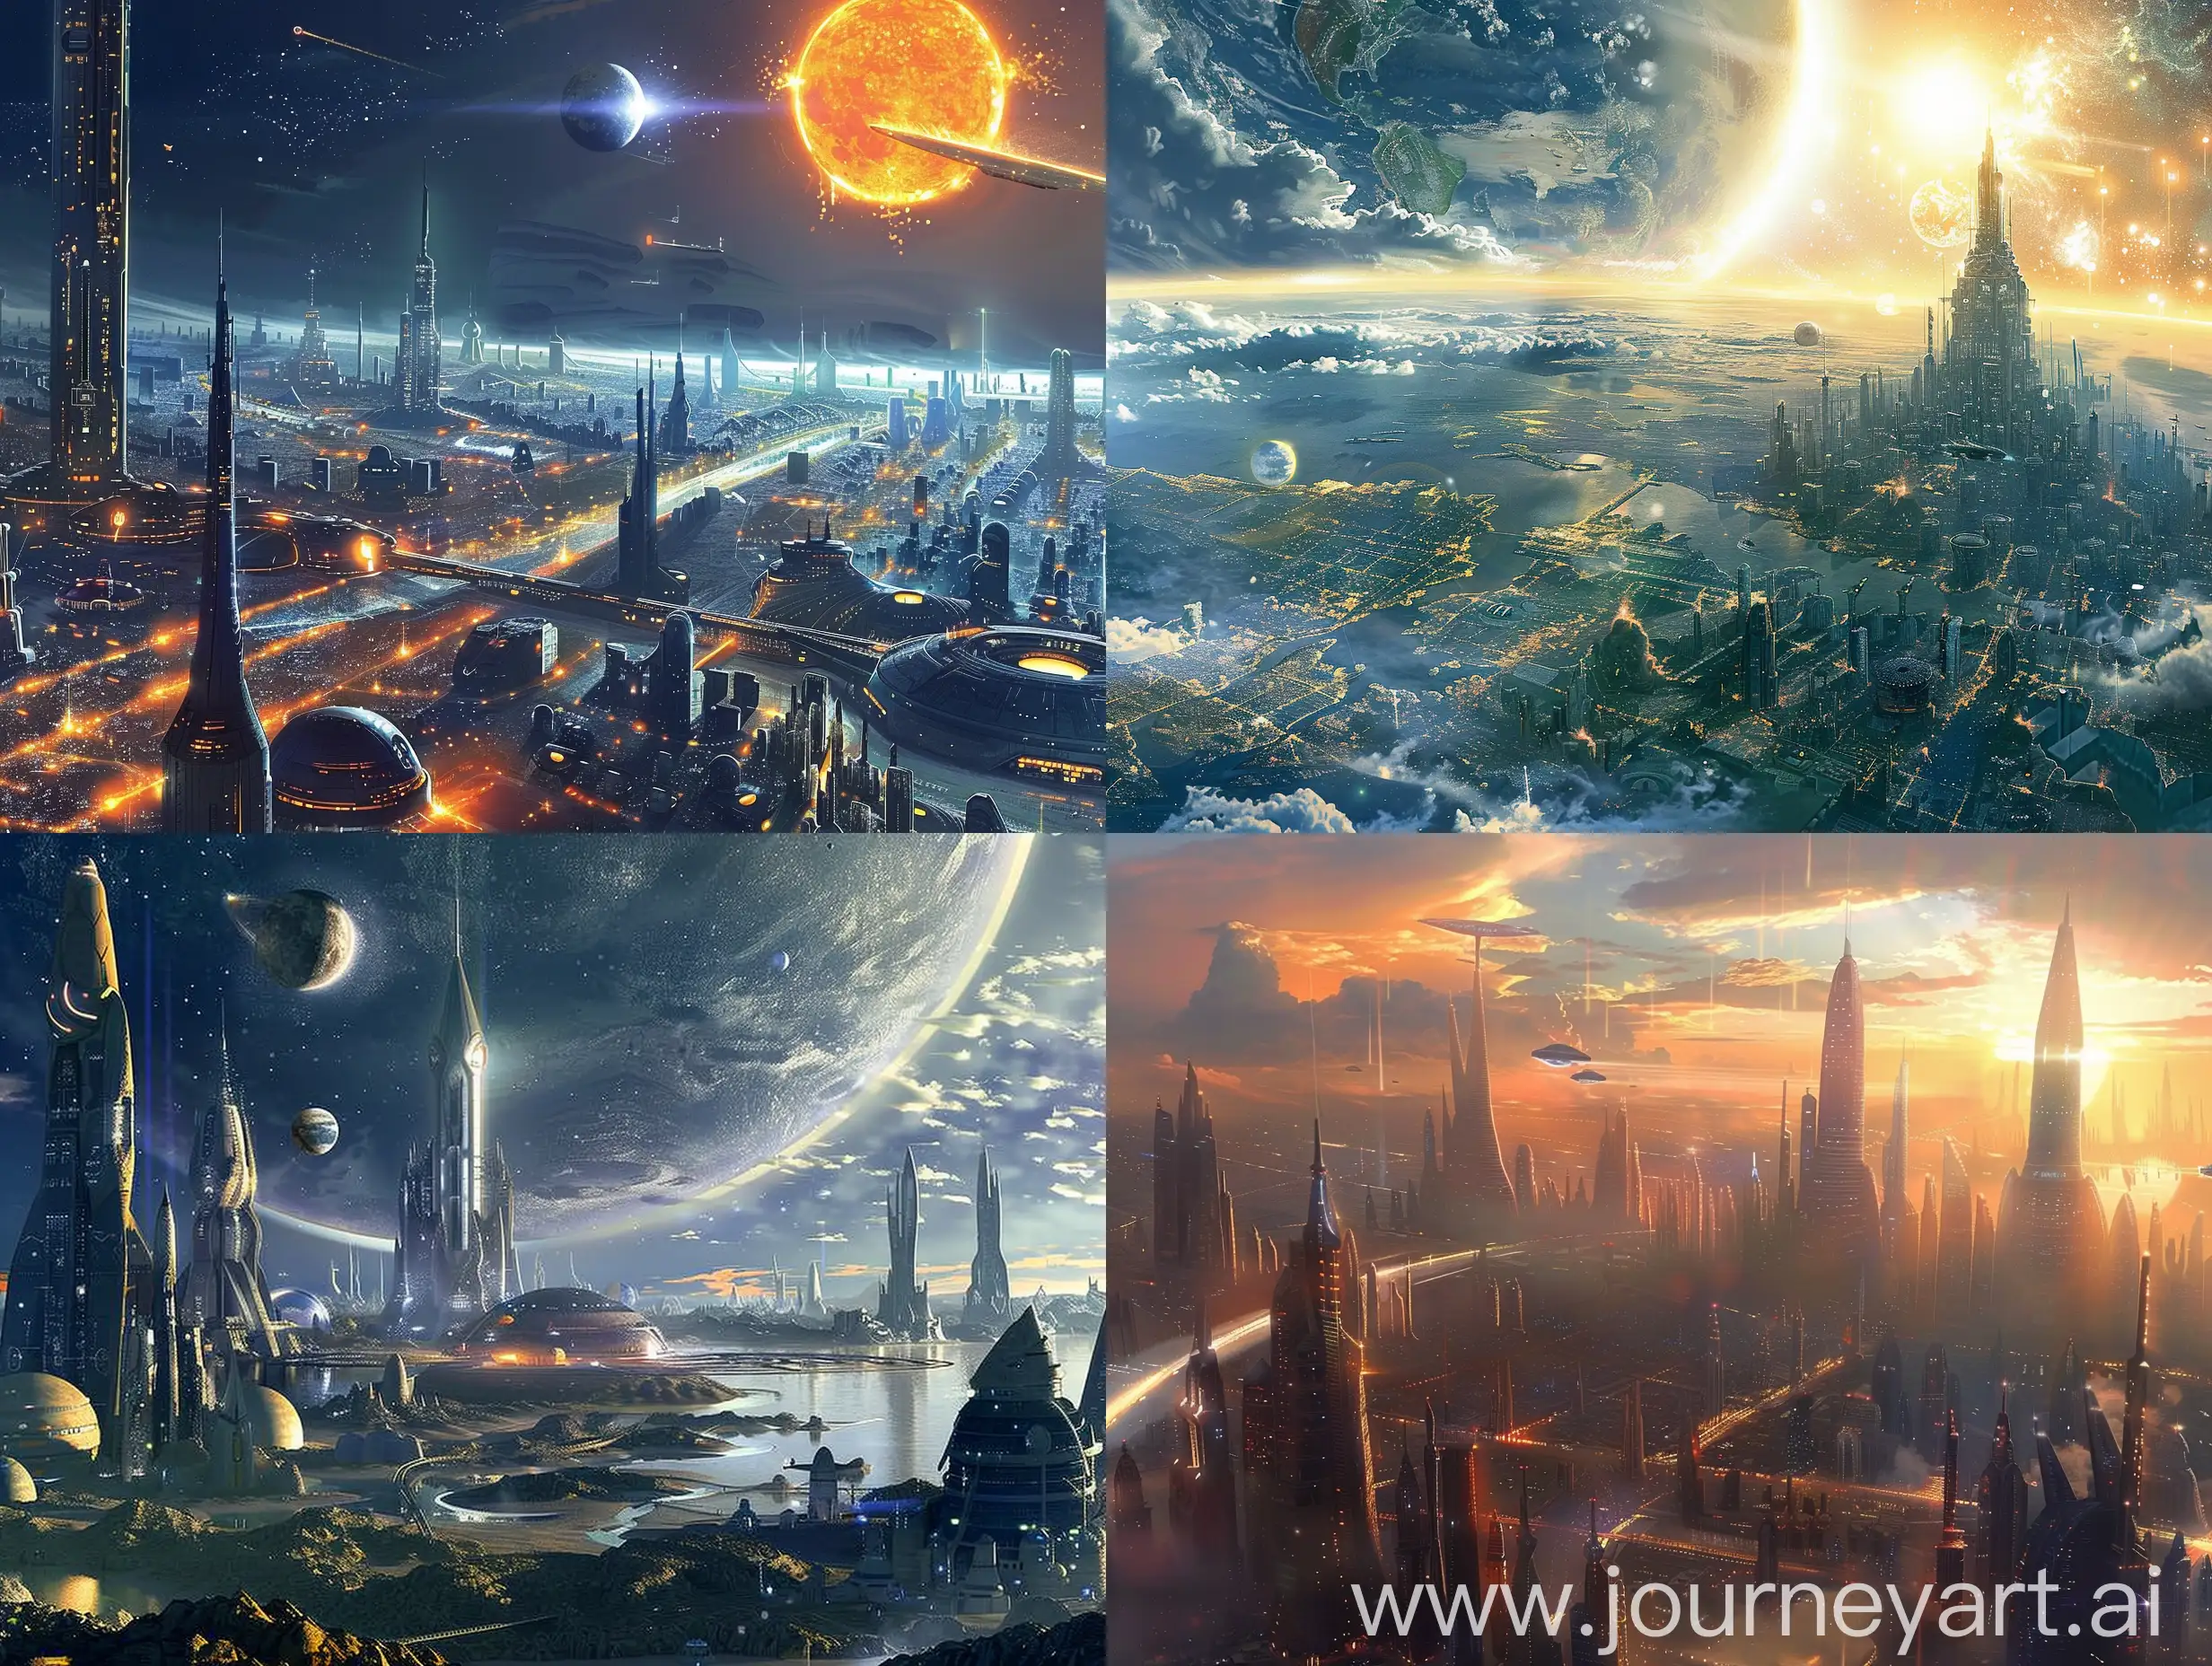 Futuristic,civilization 2,a futuristic civilization which can use power and energy of solar system,energy of sun,using outer space resources,hi tech technology,super advanced.All civilization is living on the solar system,avoid bad and distorted view.